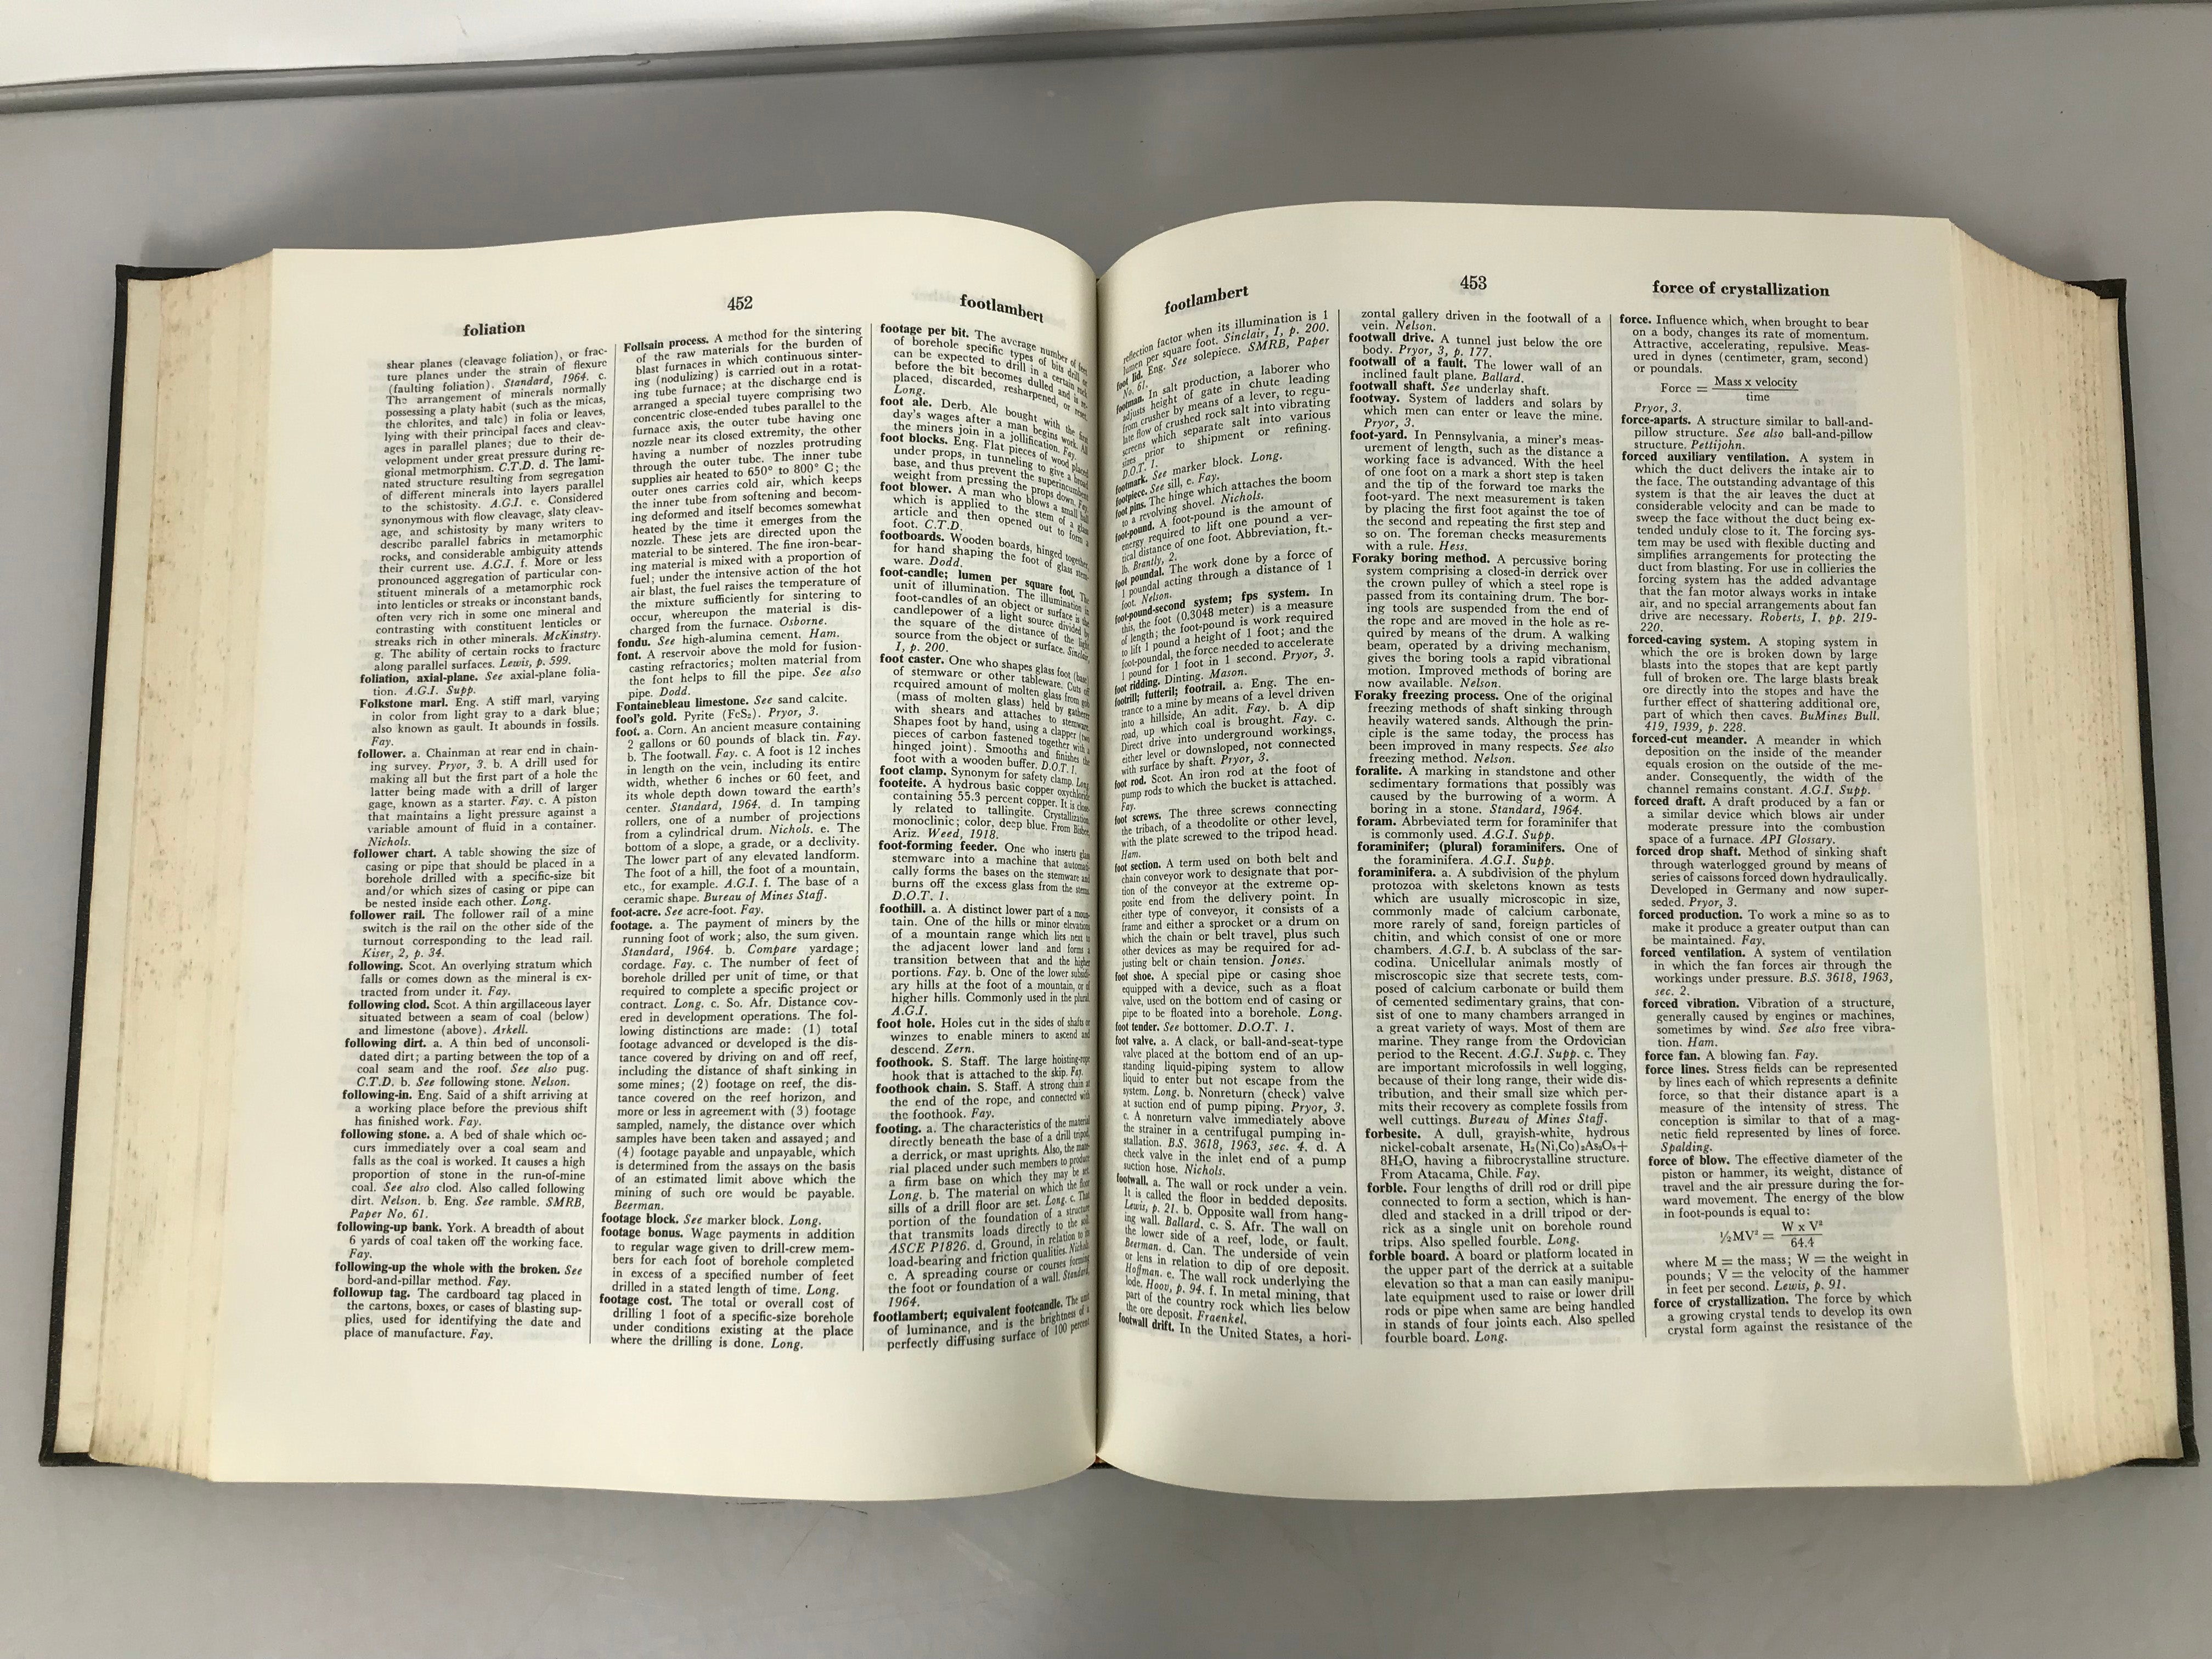 A Dictionary of Mining, Mineral, and Related Terms 1968